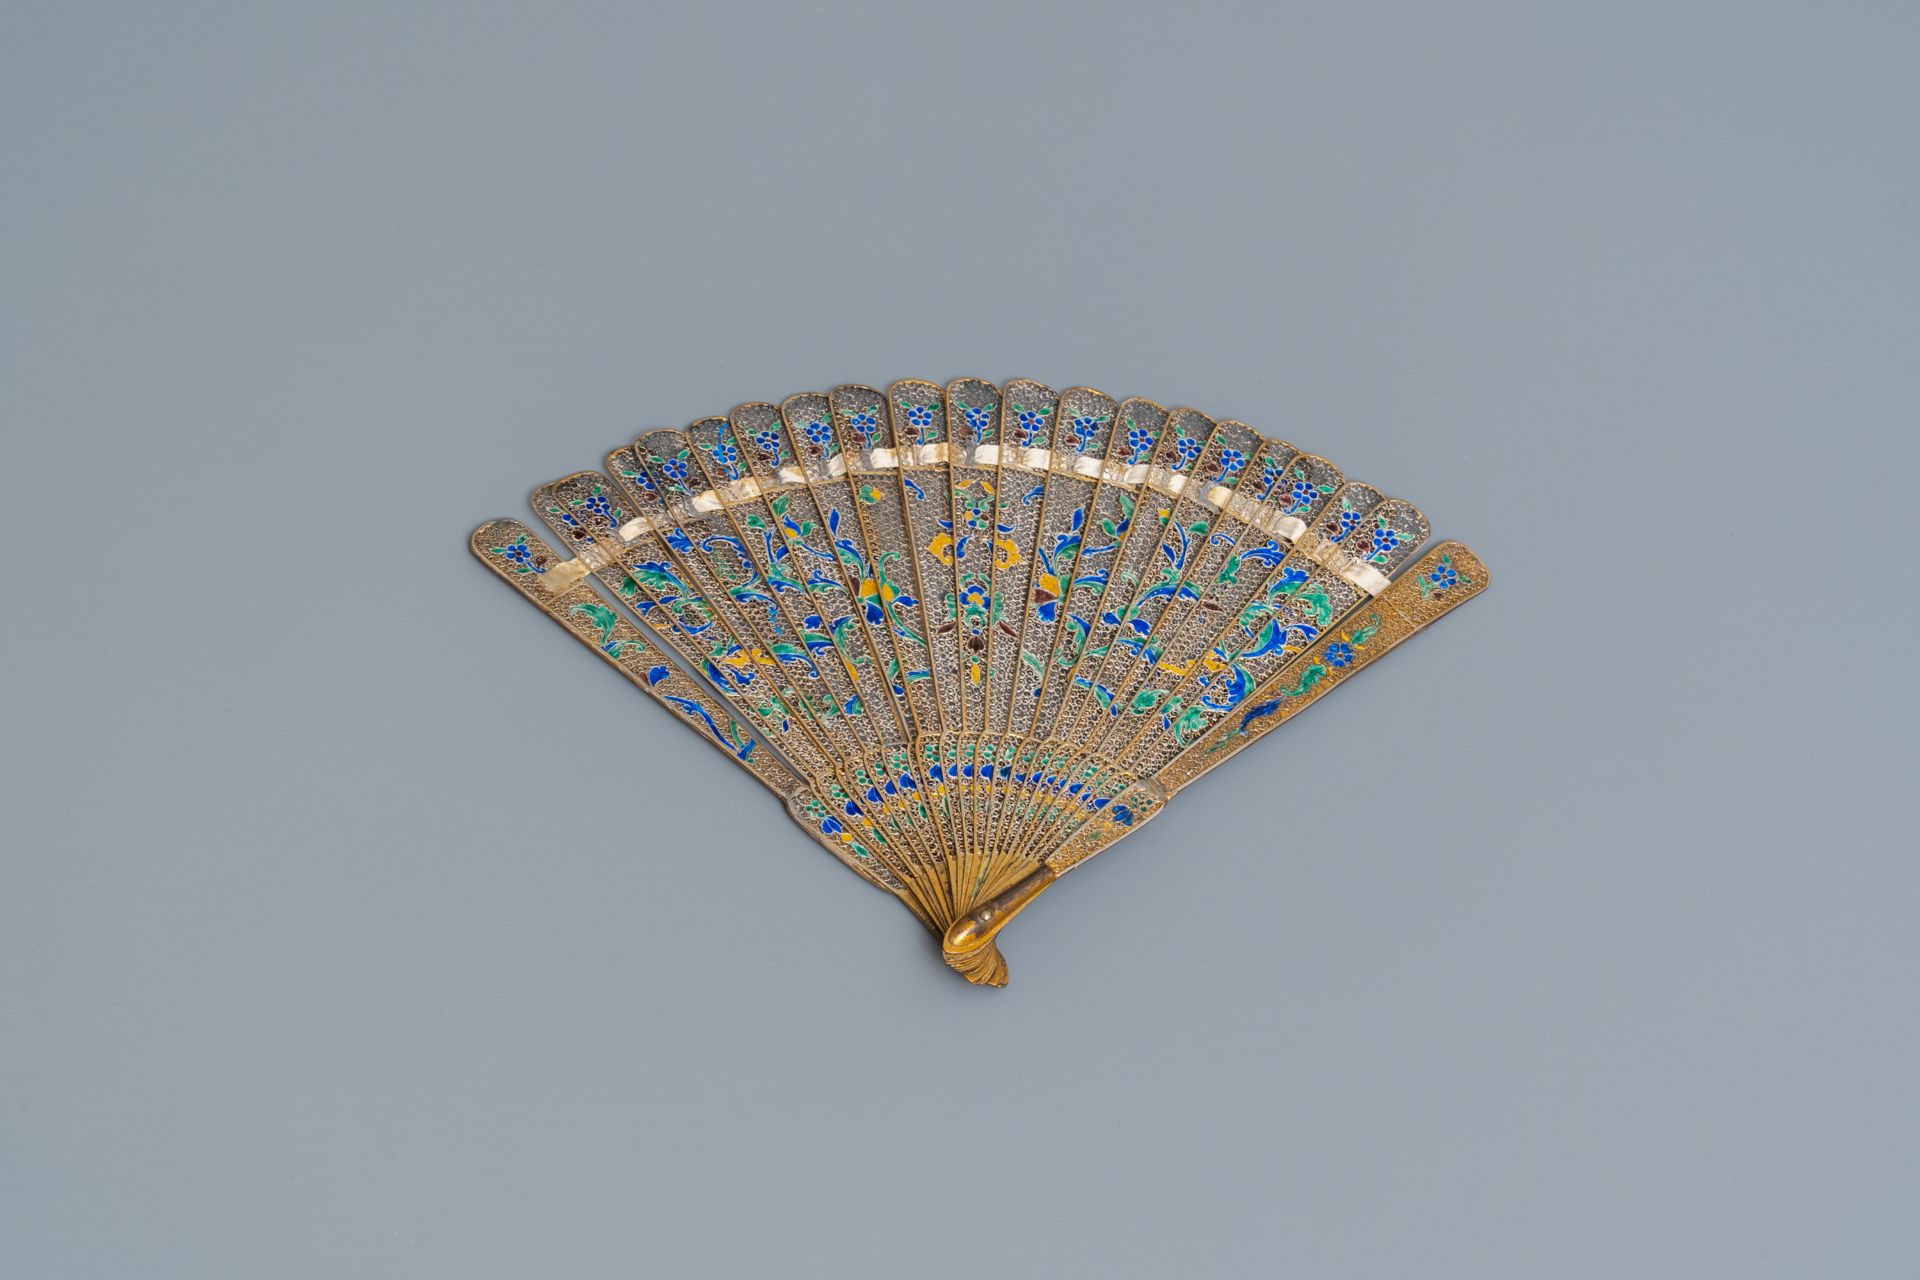 Two Chinese filigree and enamelled silver fans, 19th C. - Image 5 of 7